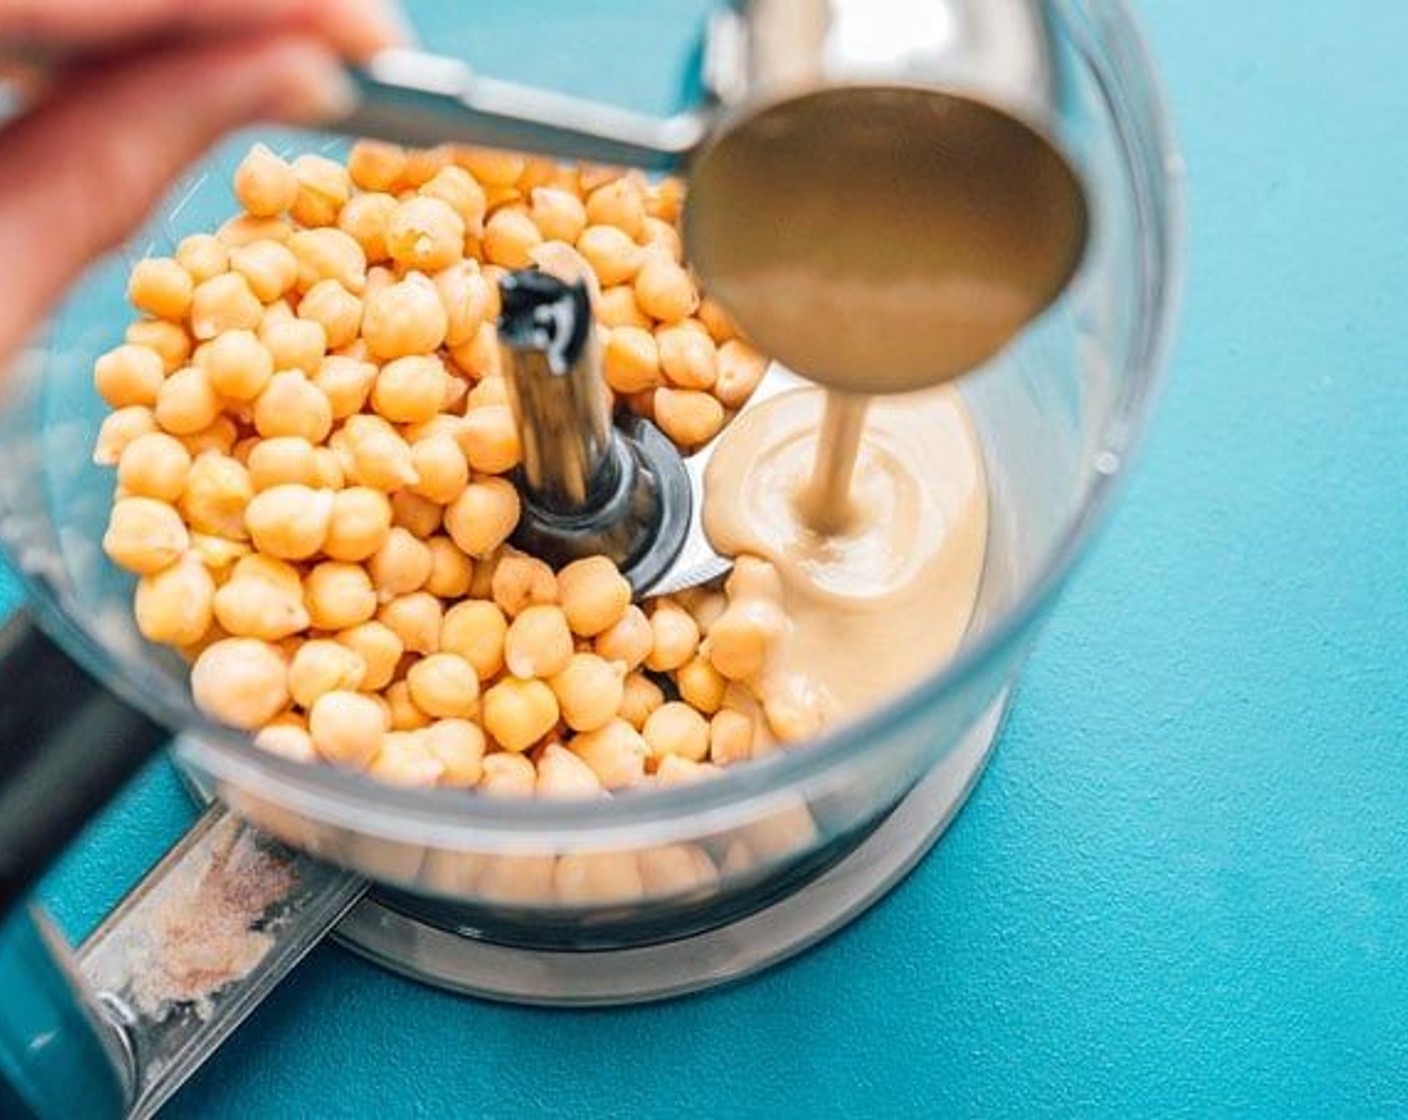 step 1 In a food processor, combine Chickpeas (1 can), Tahini (1/4 cup) and Vanilla Extract (1 tsp) until smooth. Add Water (2 Tbsp) to thin a little bit.